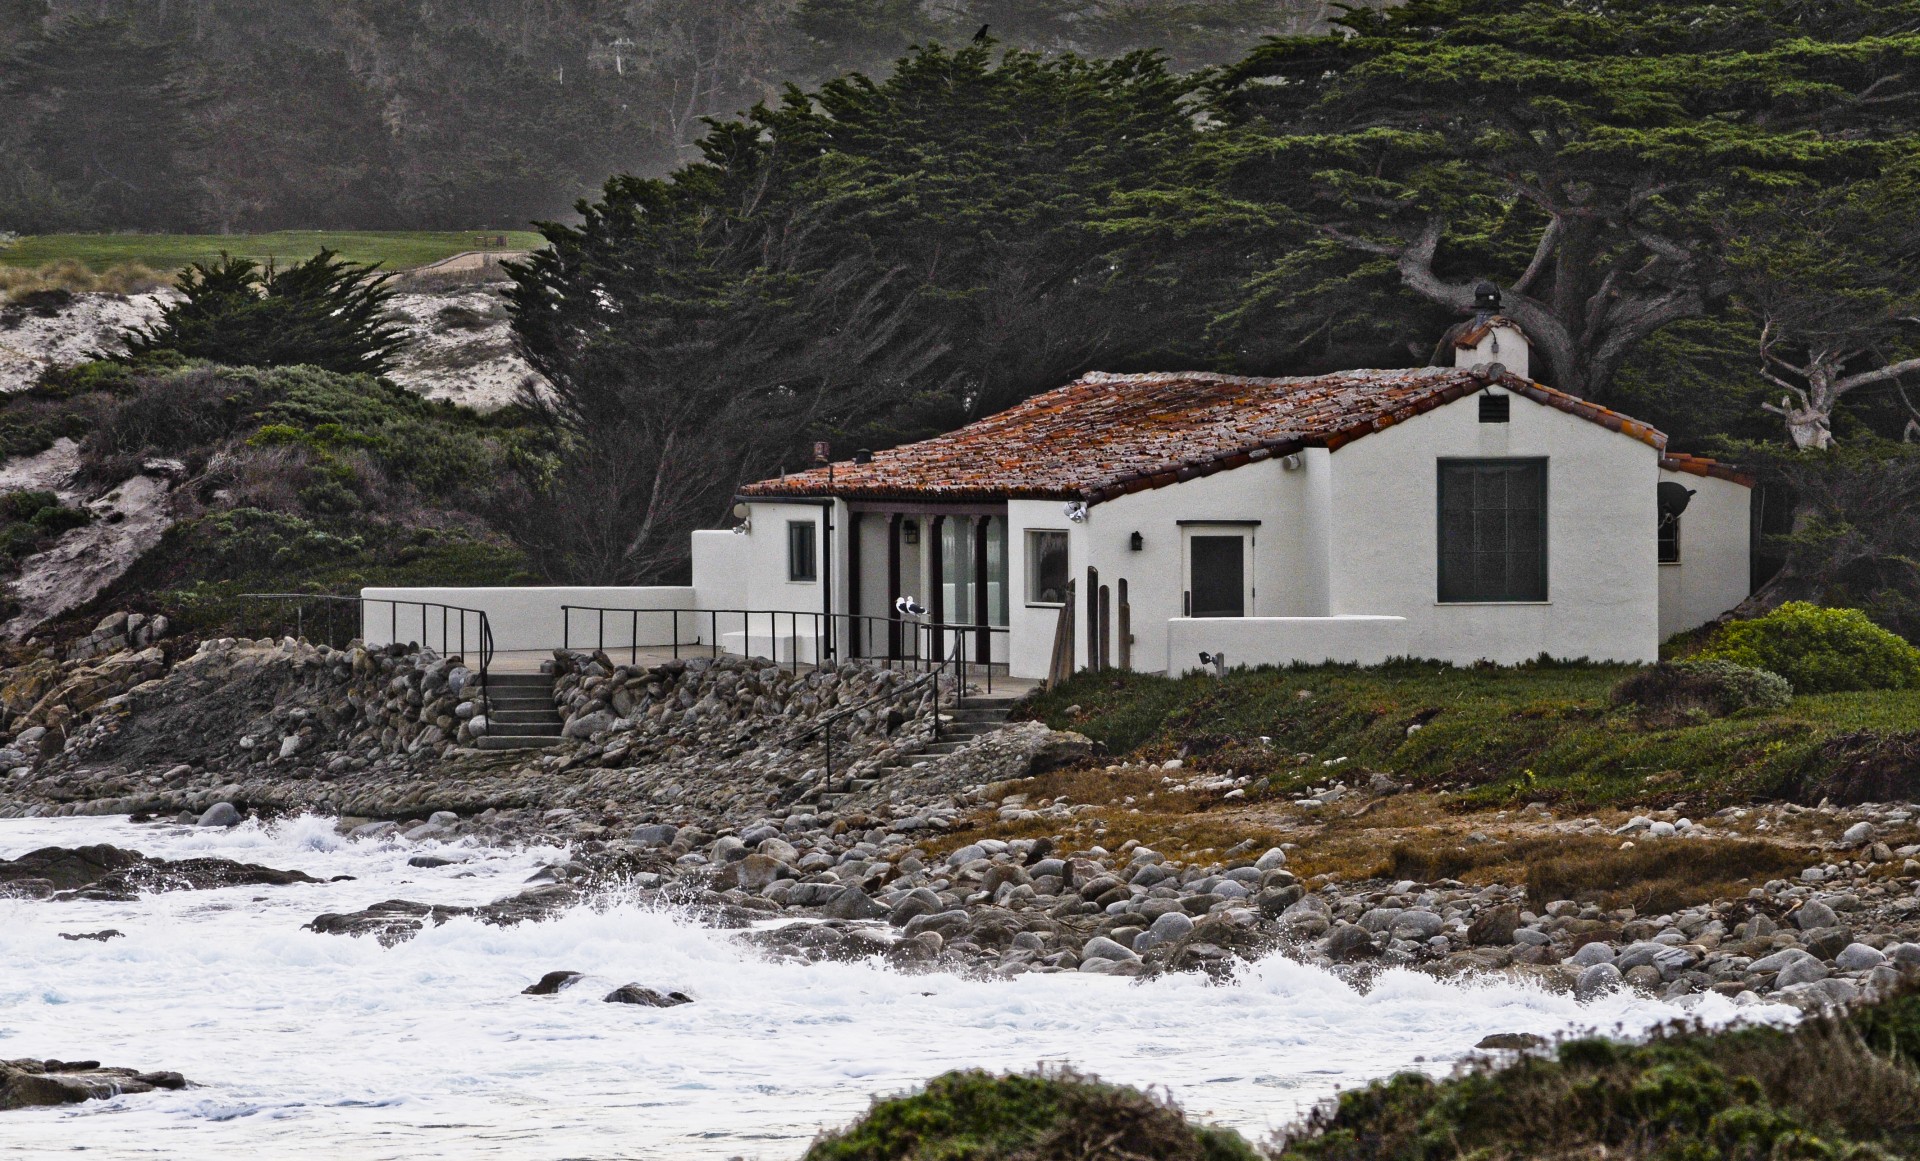 Home on the shore of the 17 Mile Drive, Monterey Peninsula, California